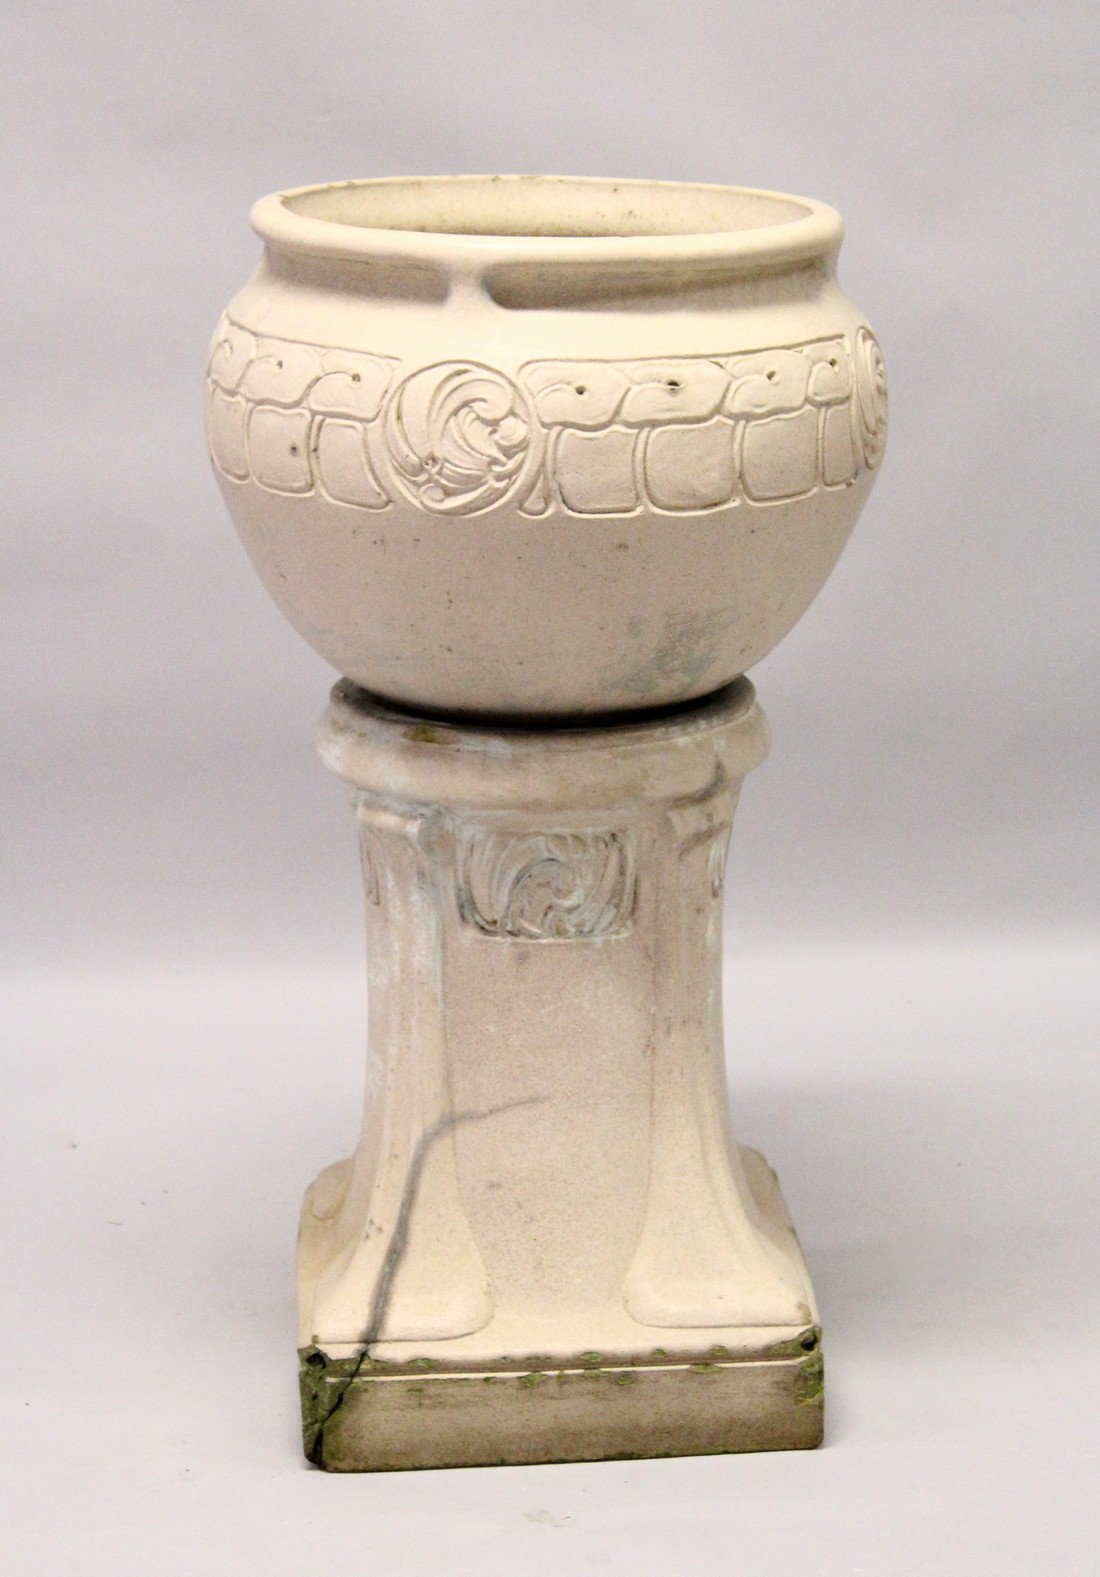 A LEEDS FIRE CLAY LEFCO WARE STONE WARE JARDINIERE AND STAND, the ovid bowl with scrolls 3ft 1ins